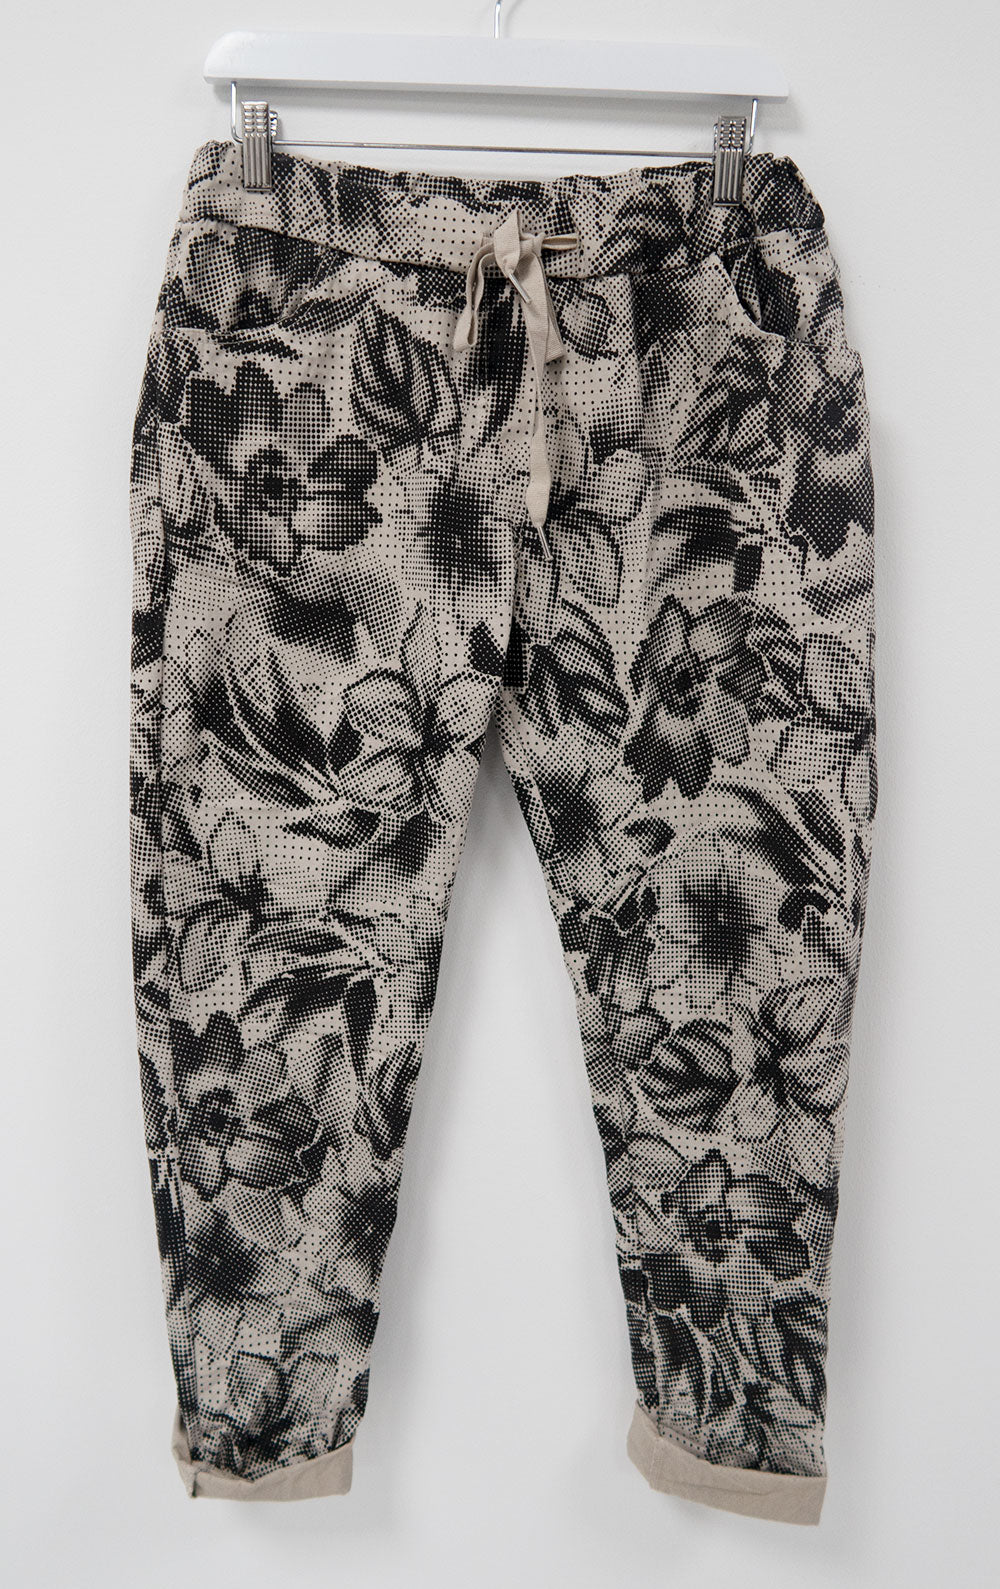 Made In Italy Floral Print Magic Stretch Chinos Pants